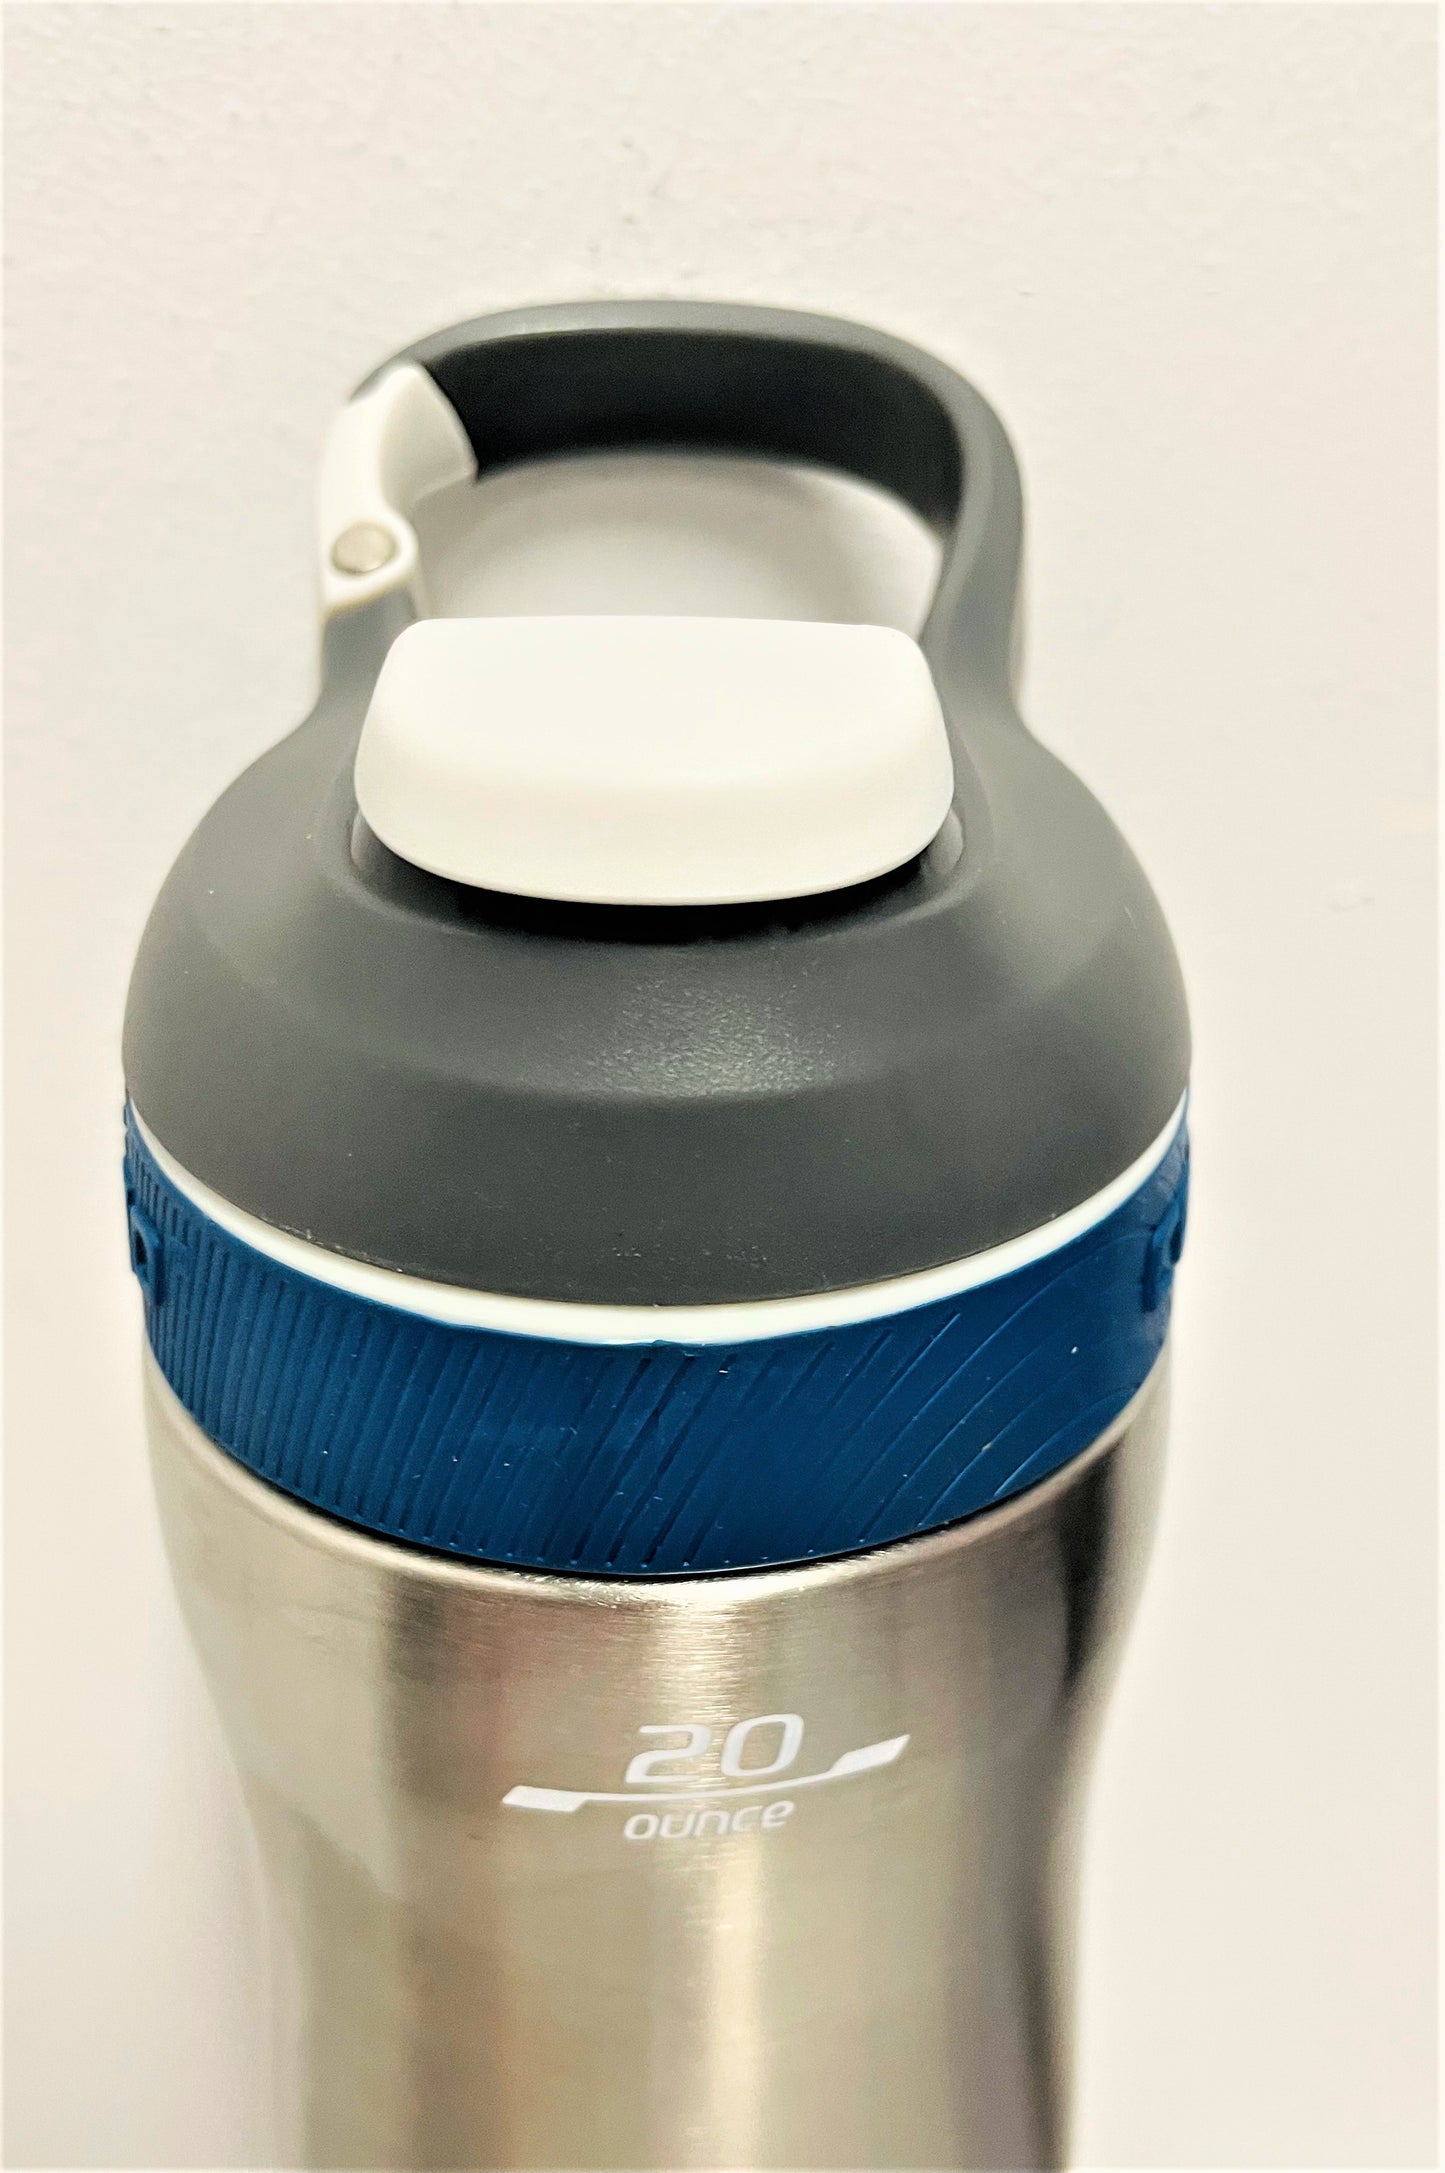 Contigo - 'Courtland' Double wall, insulated Stainless steel Sports Bottle 591ml.